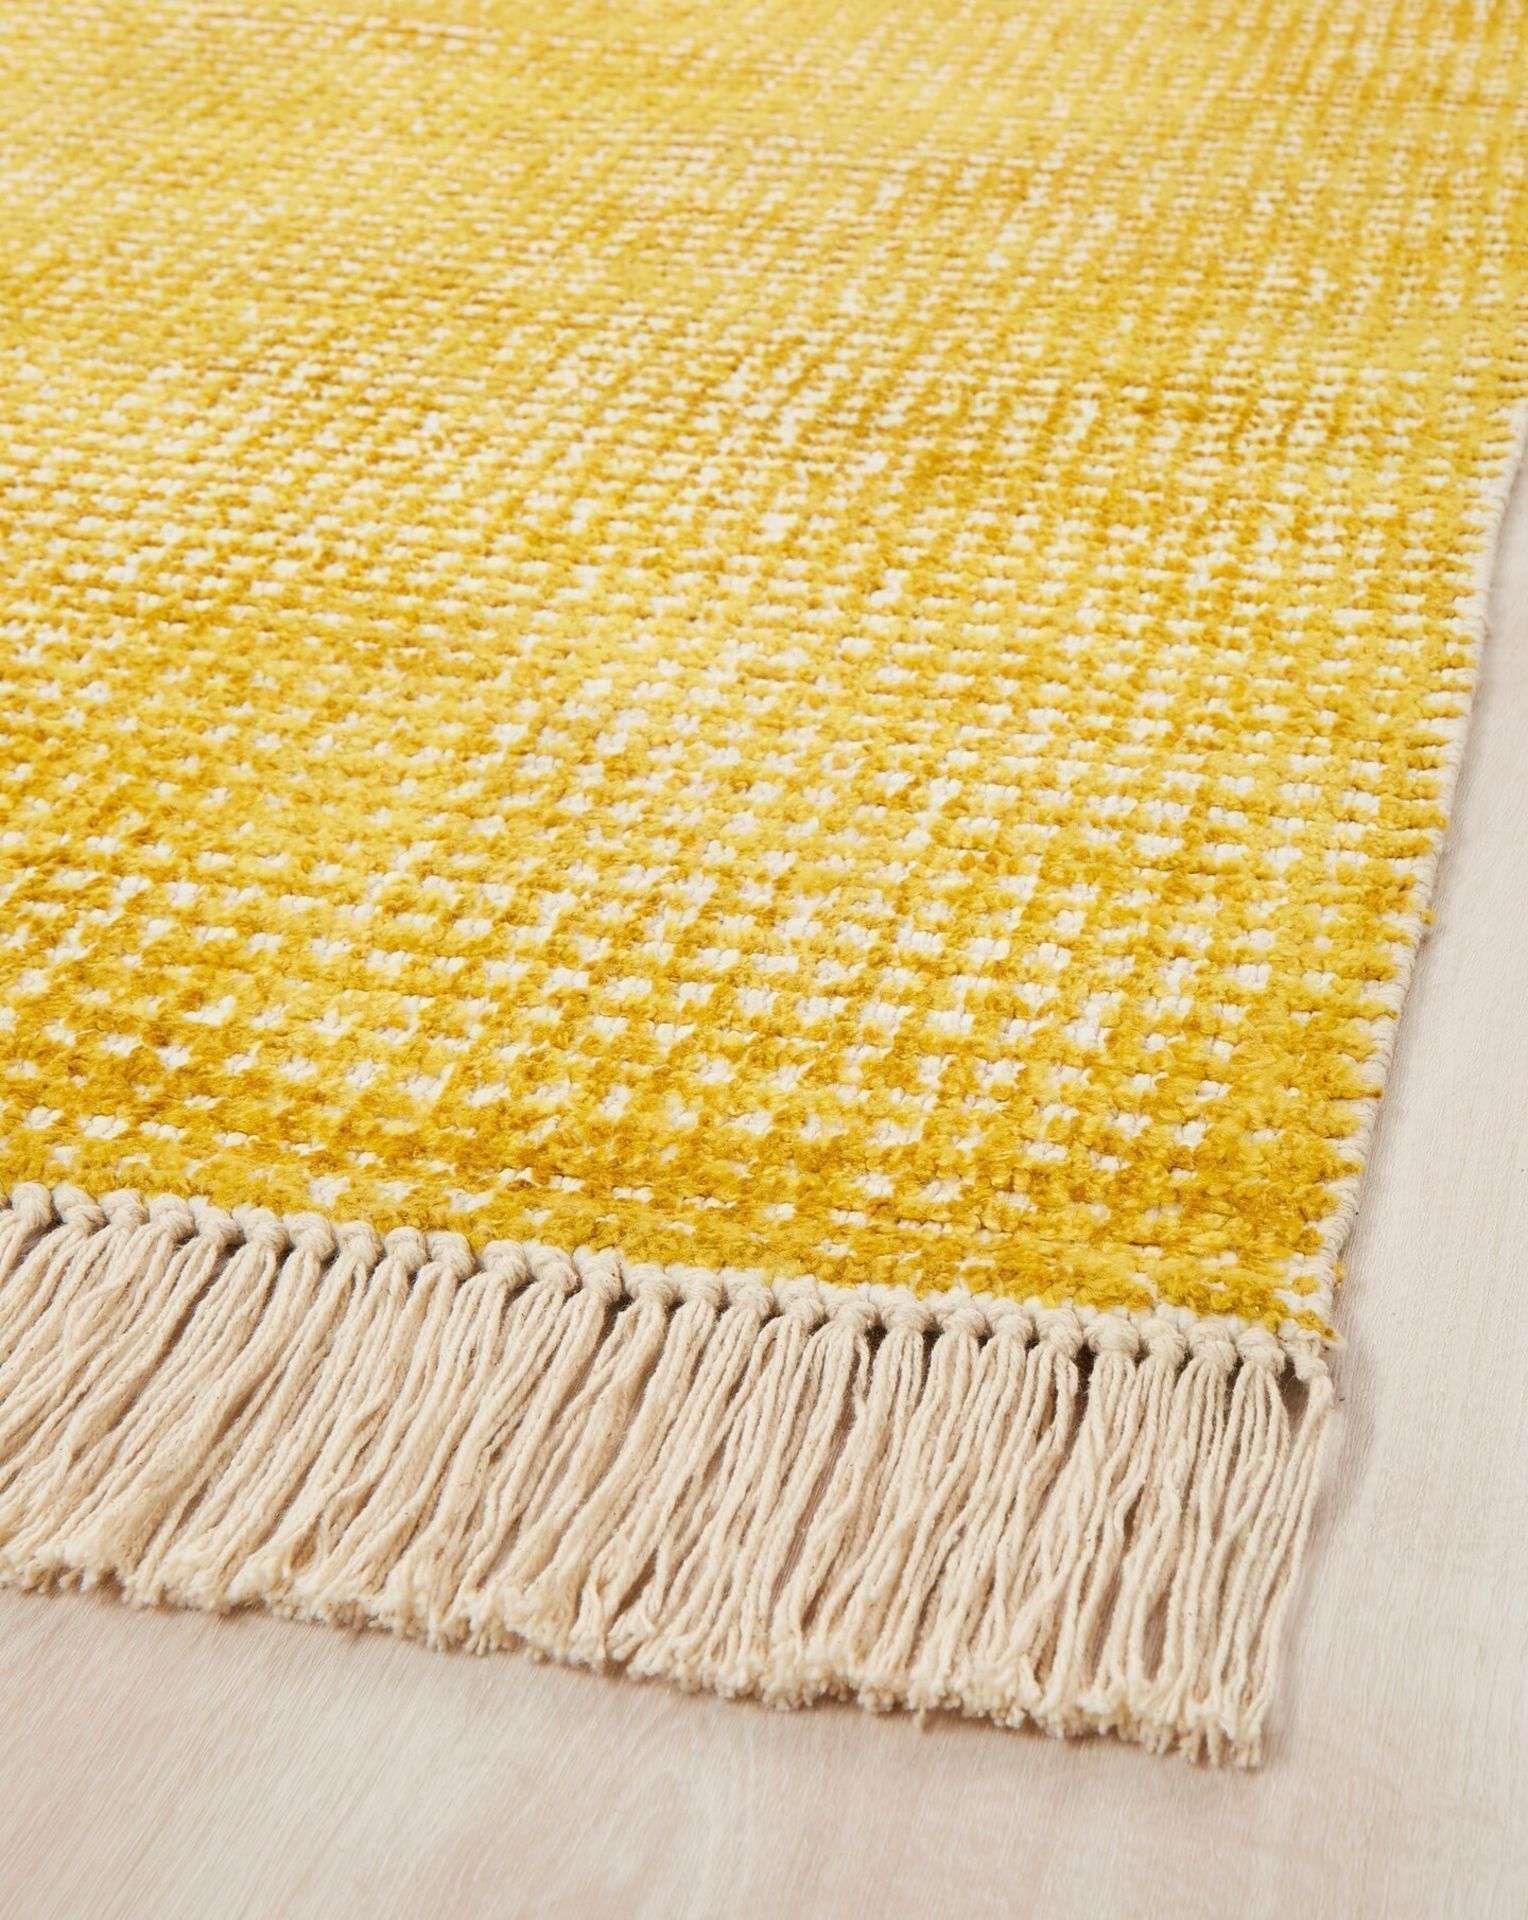 3 X BRAND NEW NUGGET GOLD HALLE FRINGE RUGS 120 X 170CM RRP £109 EACH R15-4 - Image 2 of 2